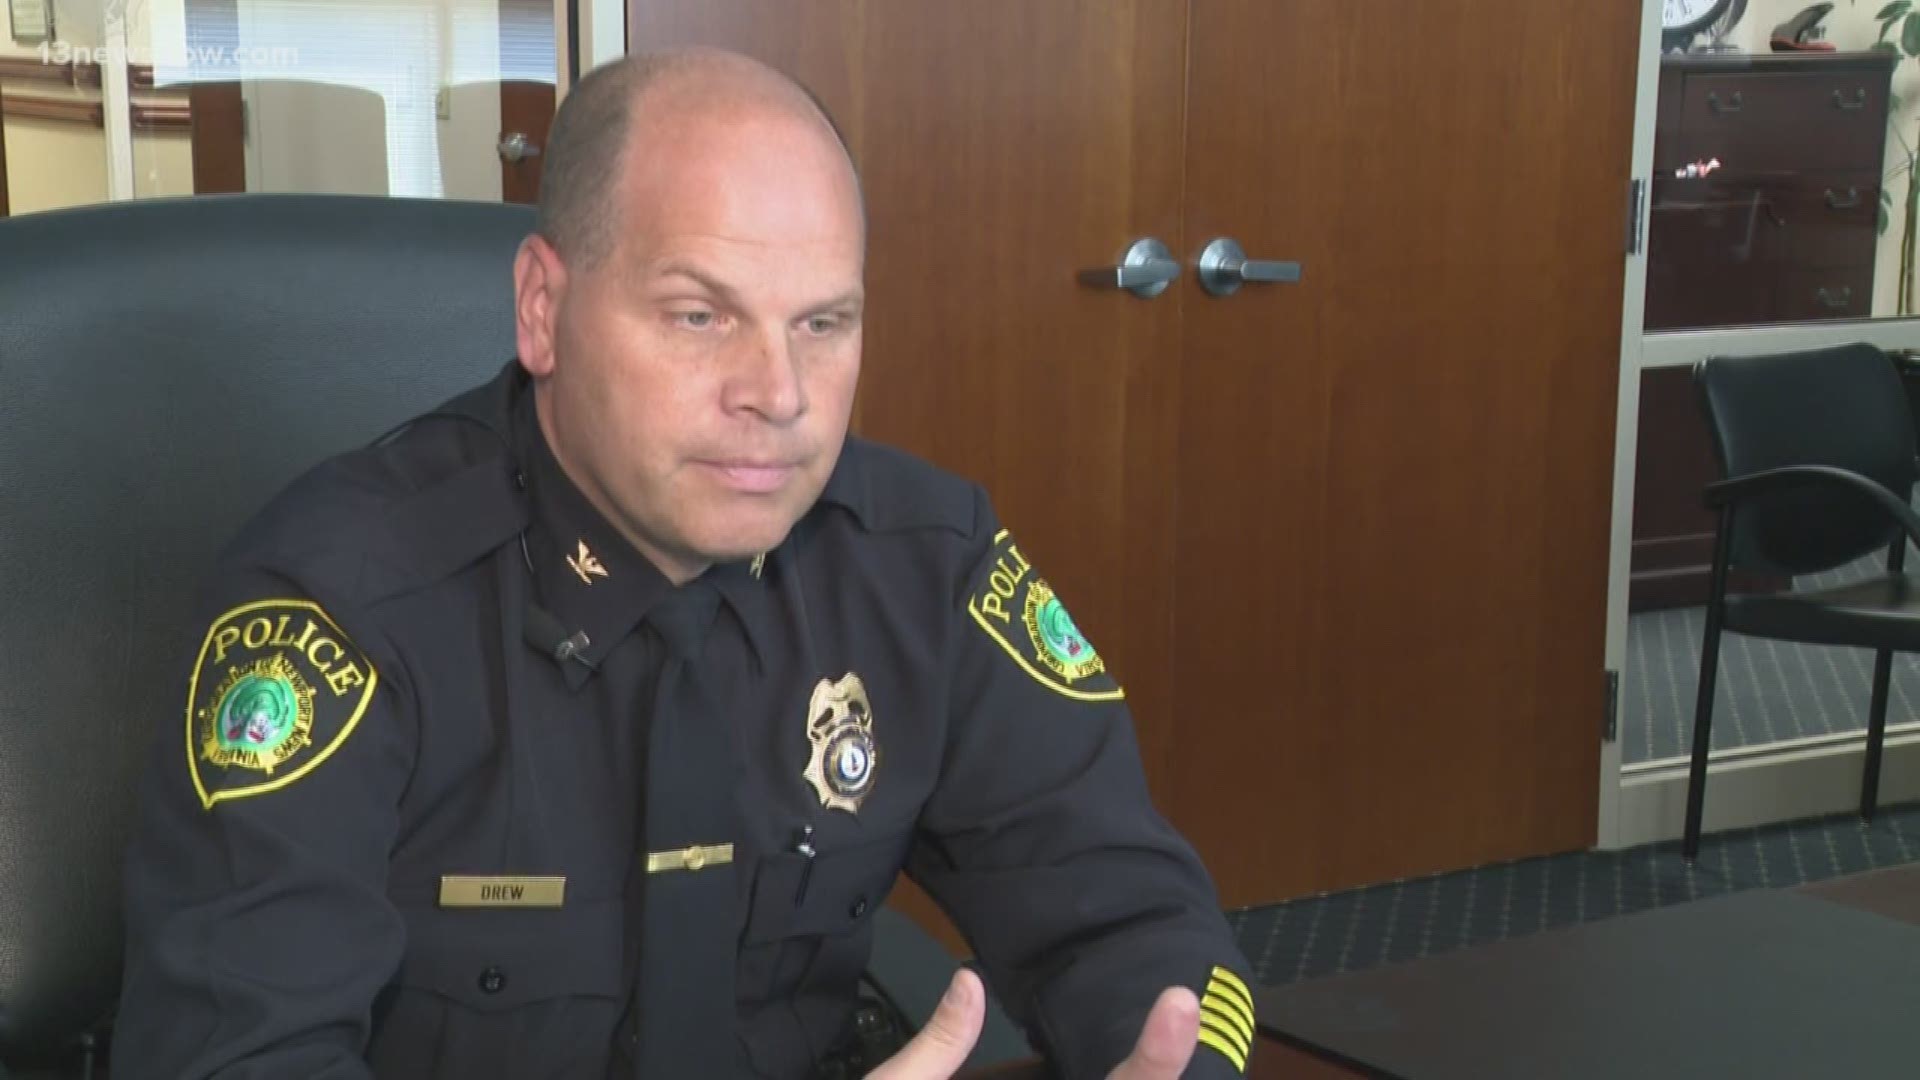 Police Chief Steve Drew said domestic violence is a "significant" problem in Newport News.